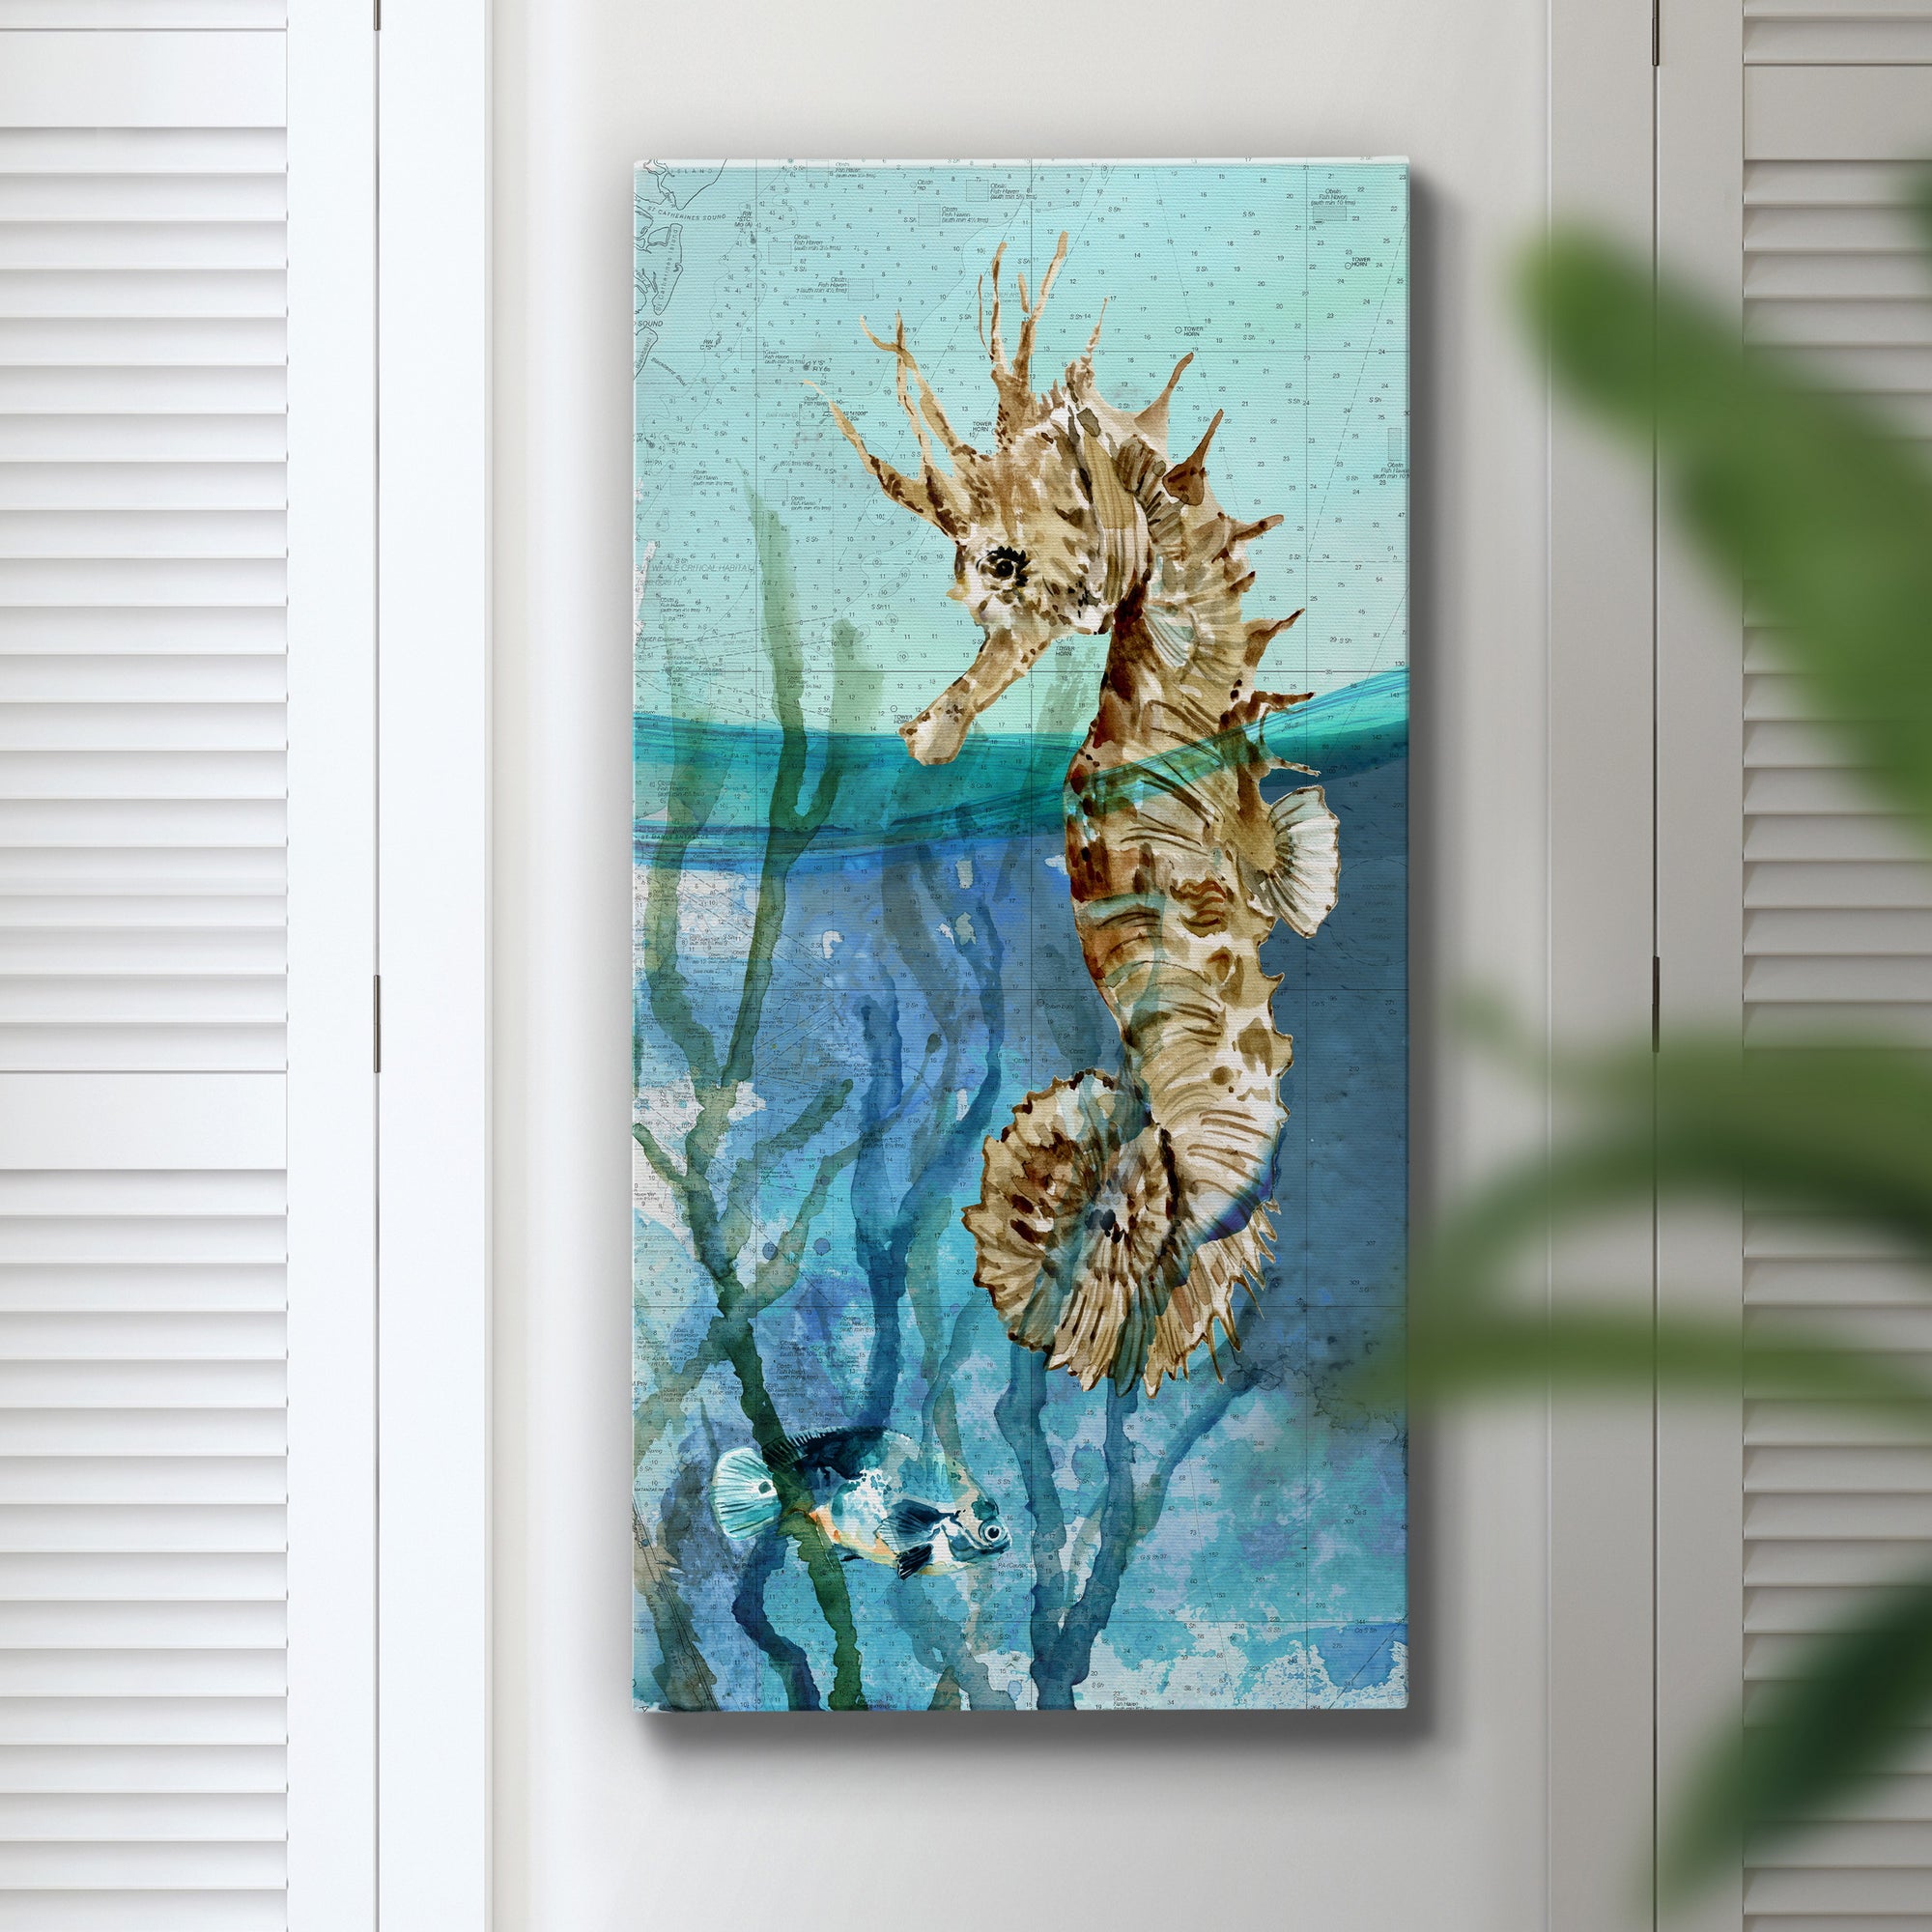 Pacific Seahorse - Premium Gallery Wrapped Canvas - Ready to Hang